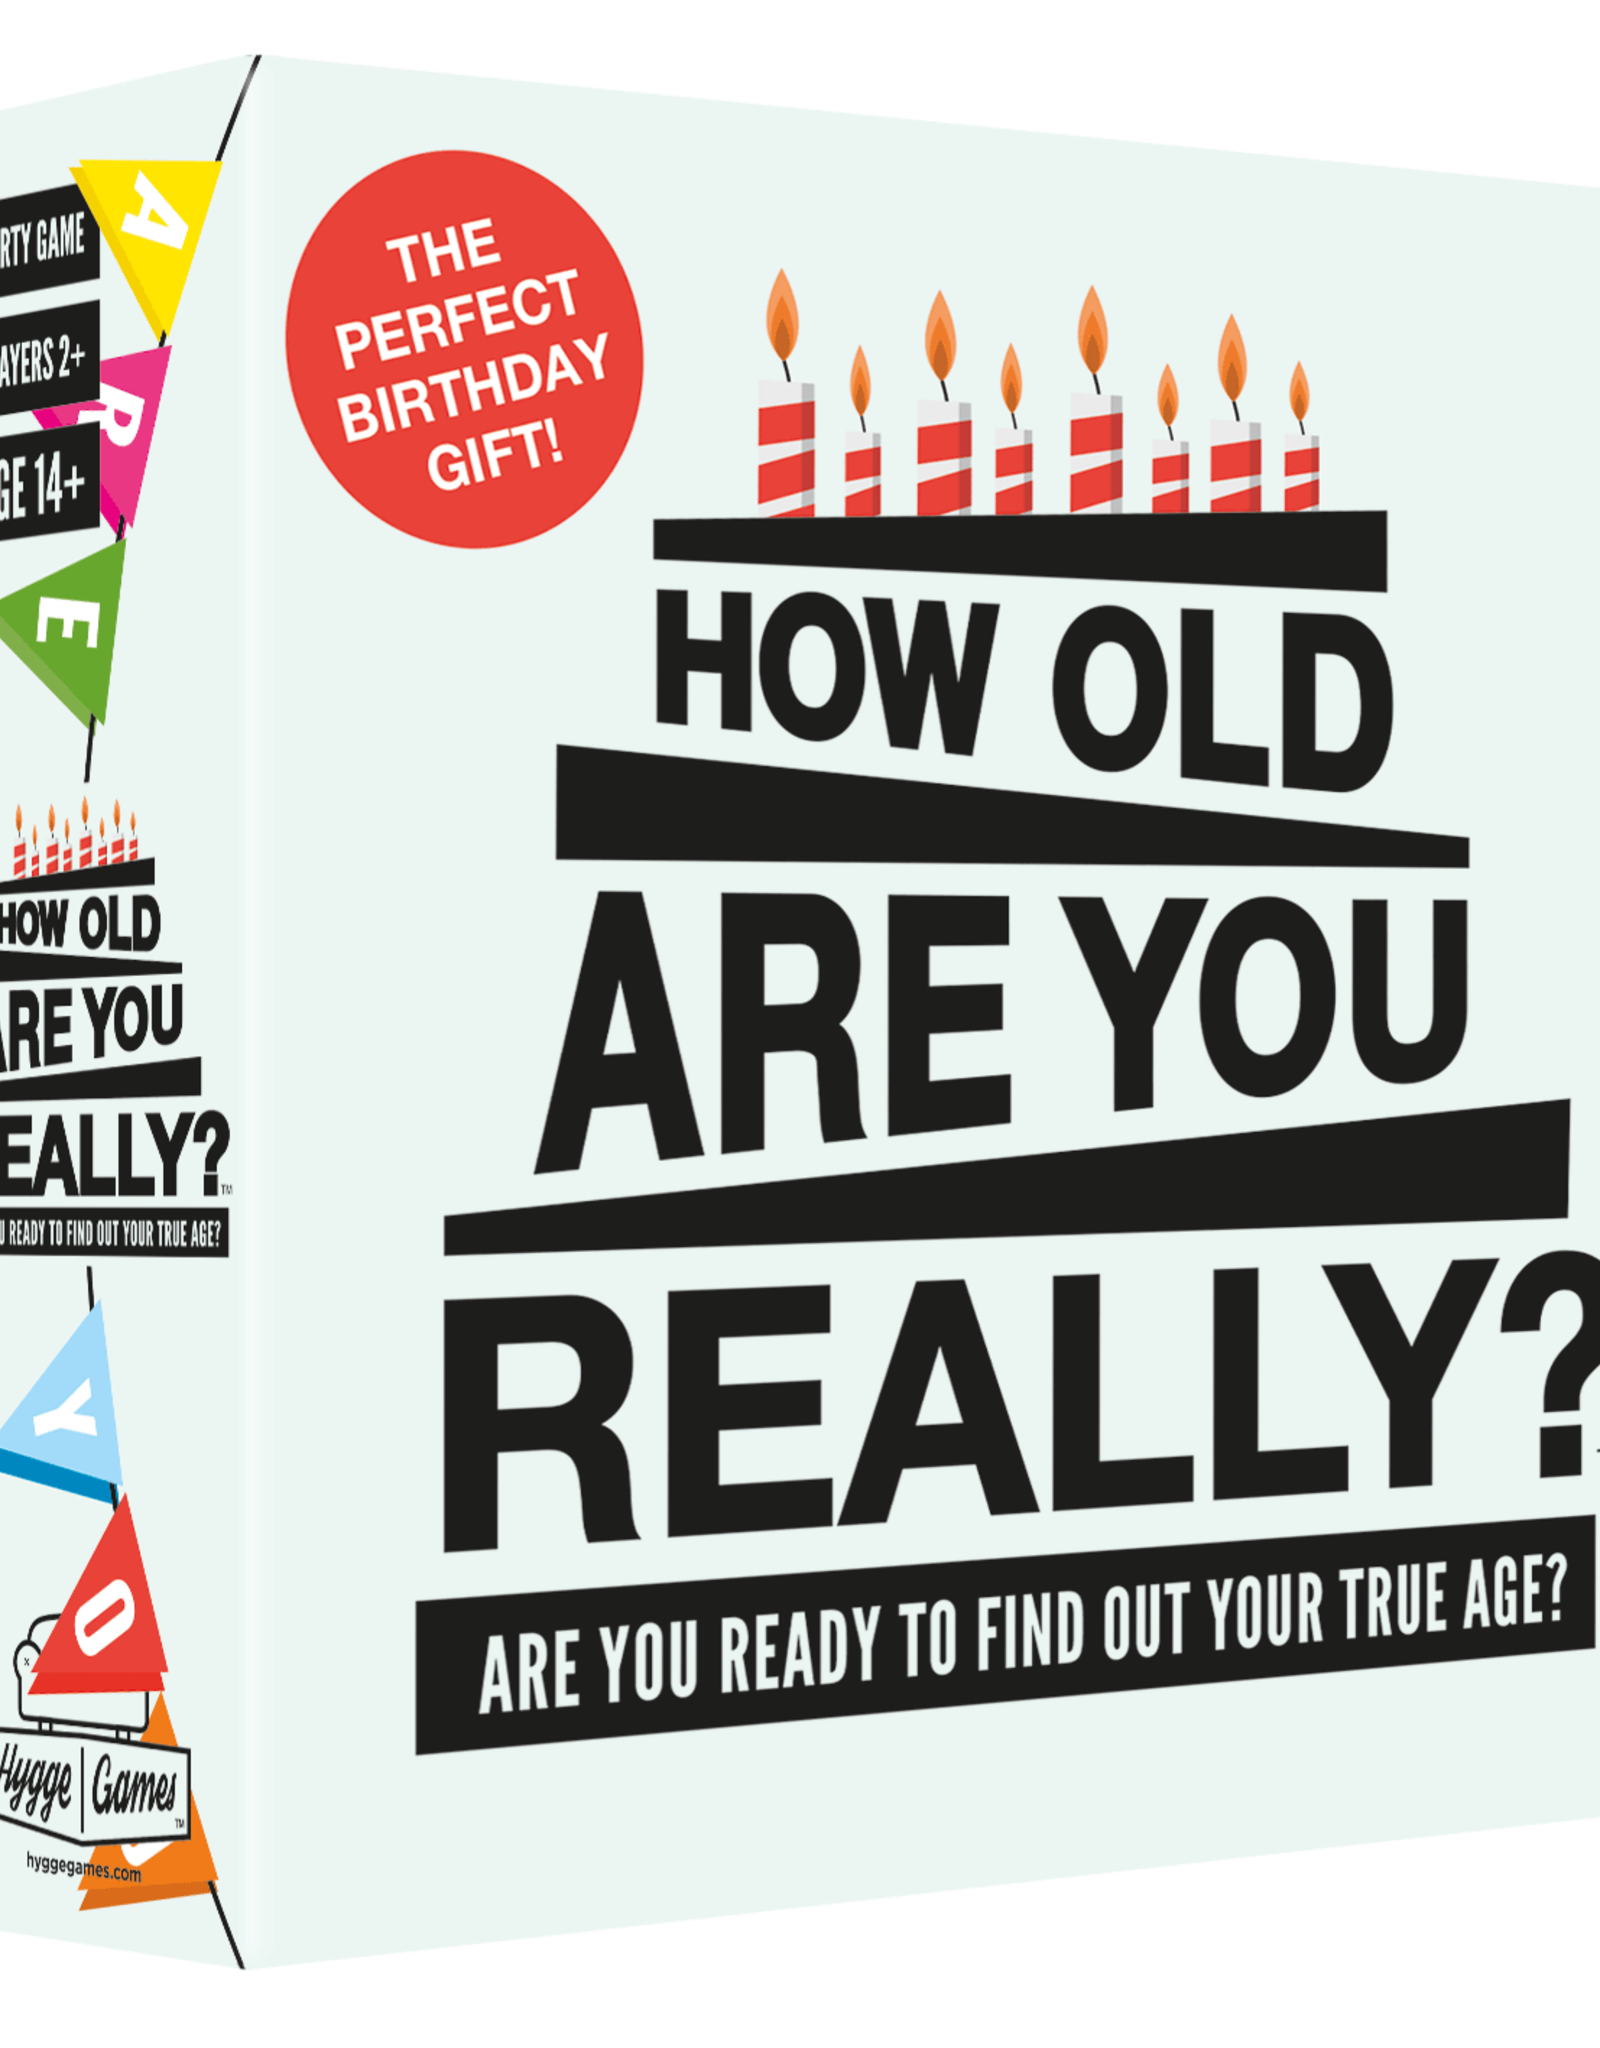 Hygge Games Hygge Games  How old are you really?